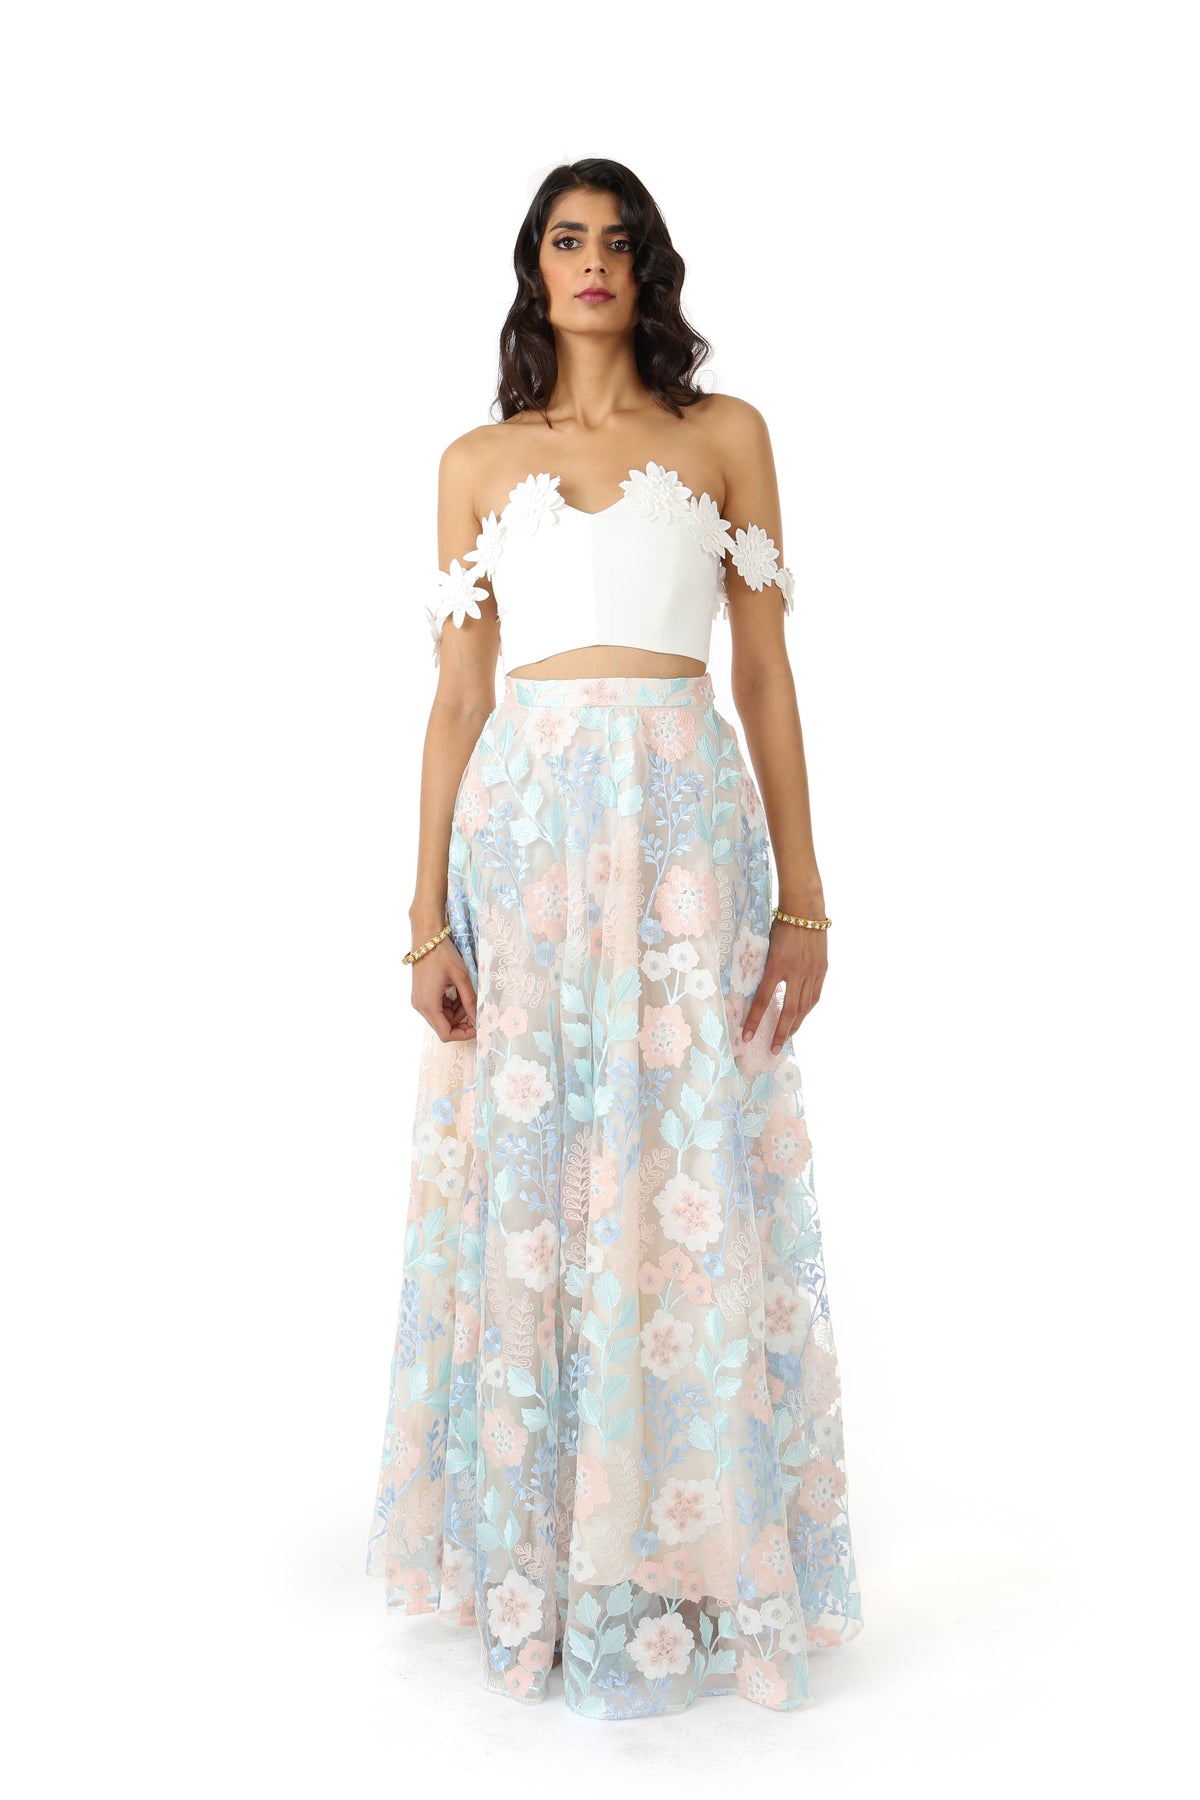 White Lehenga Top with Off-the-Shoulder White Floral Trim - Front View - Harleen Kaur - South Asian Womenswear